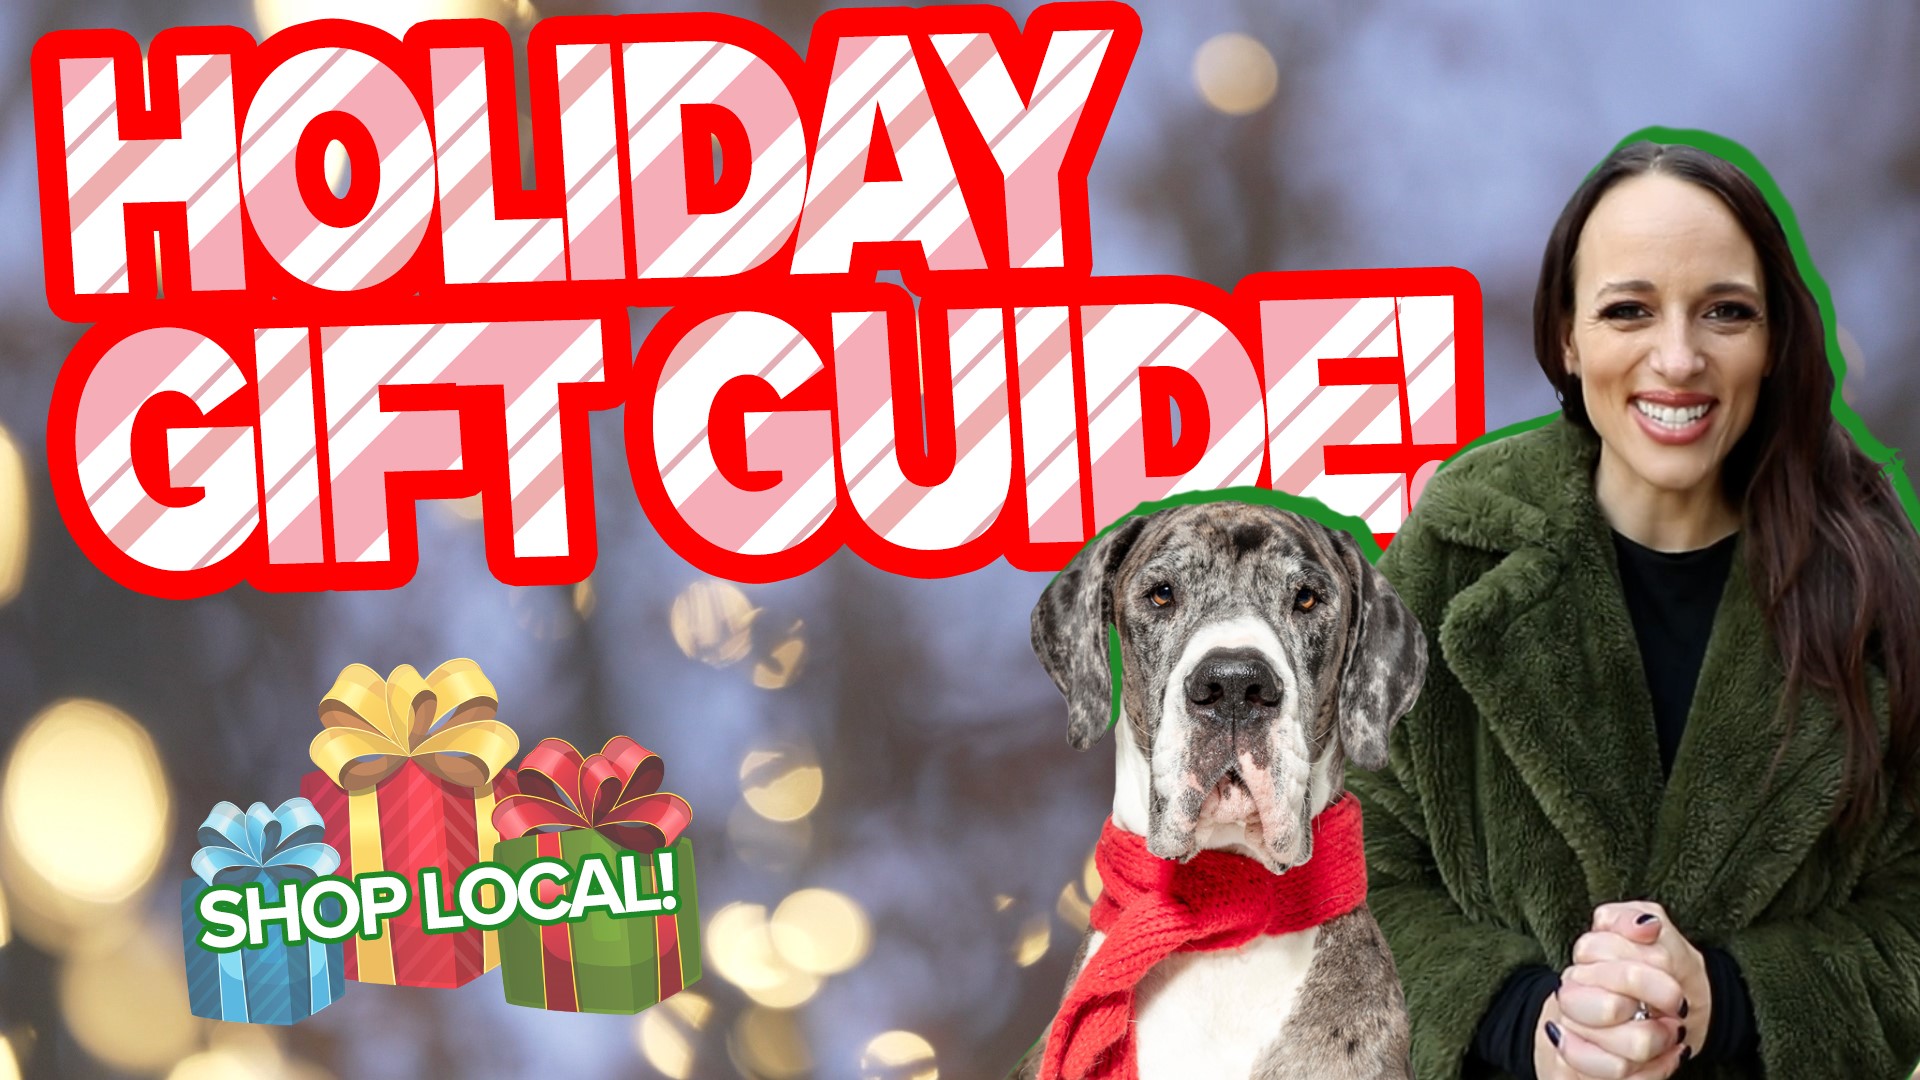 It’s holiday shopping season🎄🎅🏼!  Shop local with my gift guide!